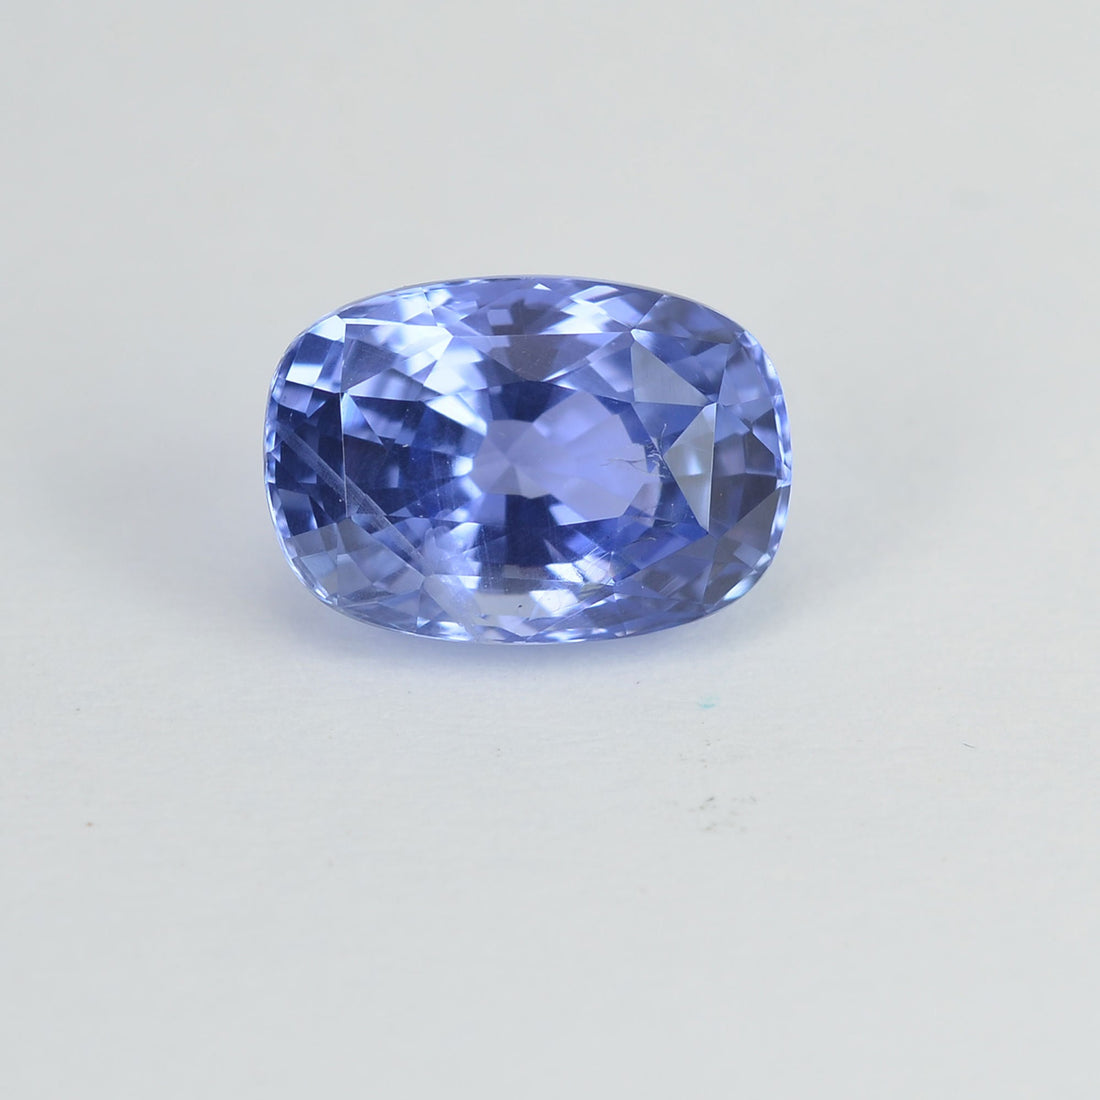 1.79 cts Unheated Natural Color Change Violet to Blue Sapphire Loose Gemstone Cushion Cut Certified